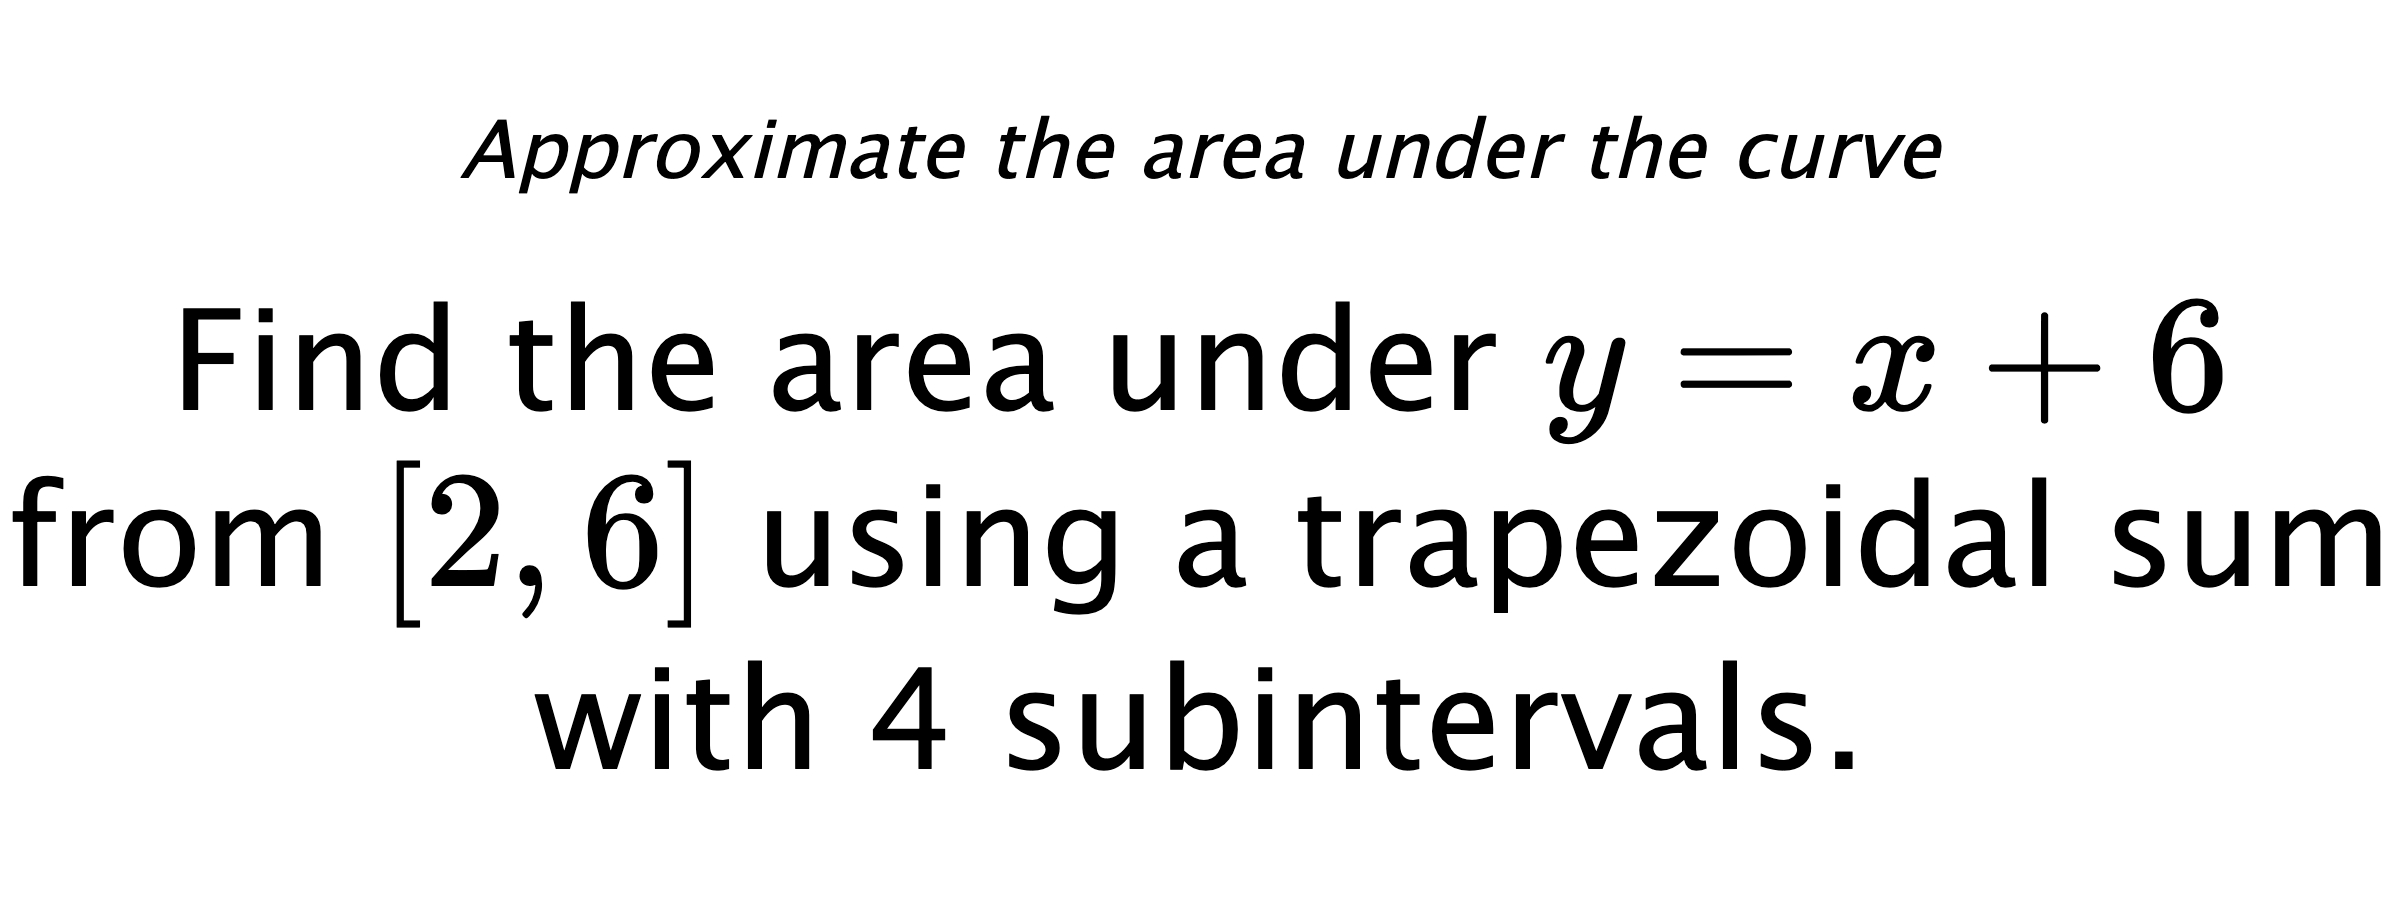 Approximate the area under the curve Find the area under $ y=x+6 $ from $ [2,6] $ using a trapezoidal sum with 4 subintervals.